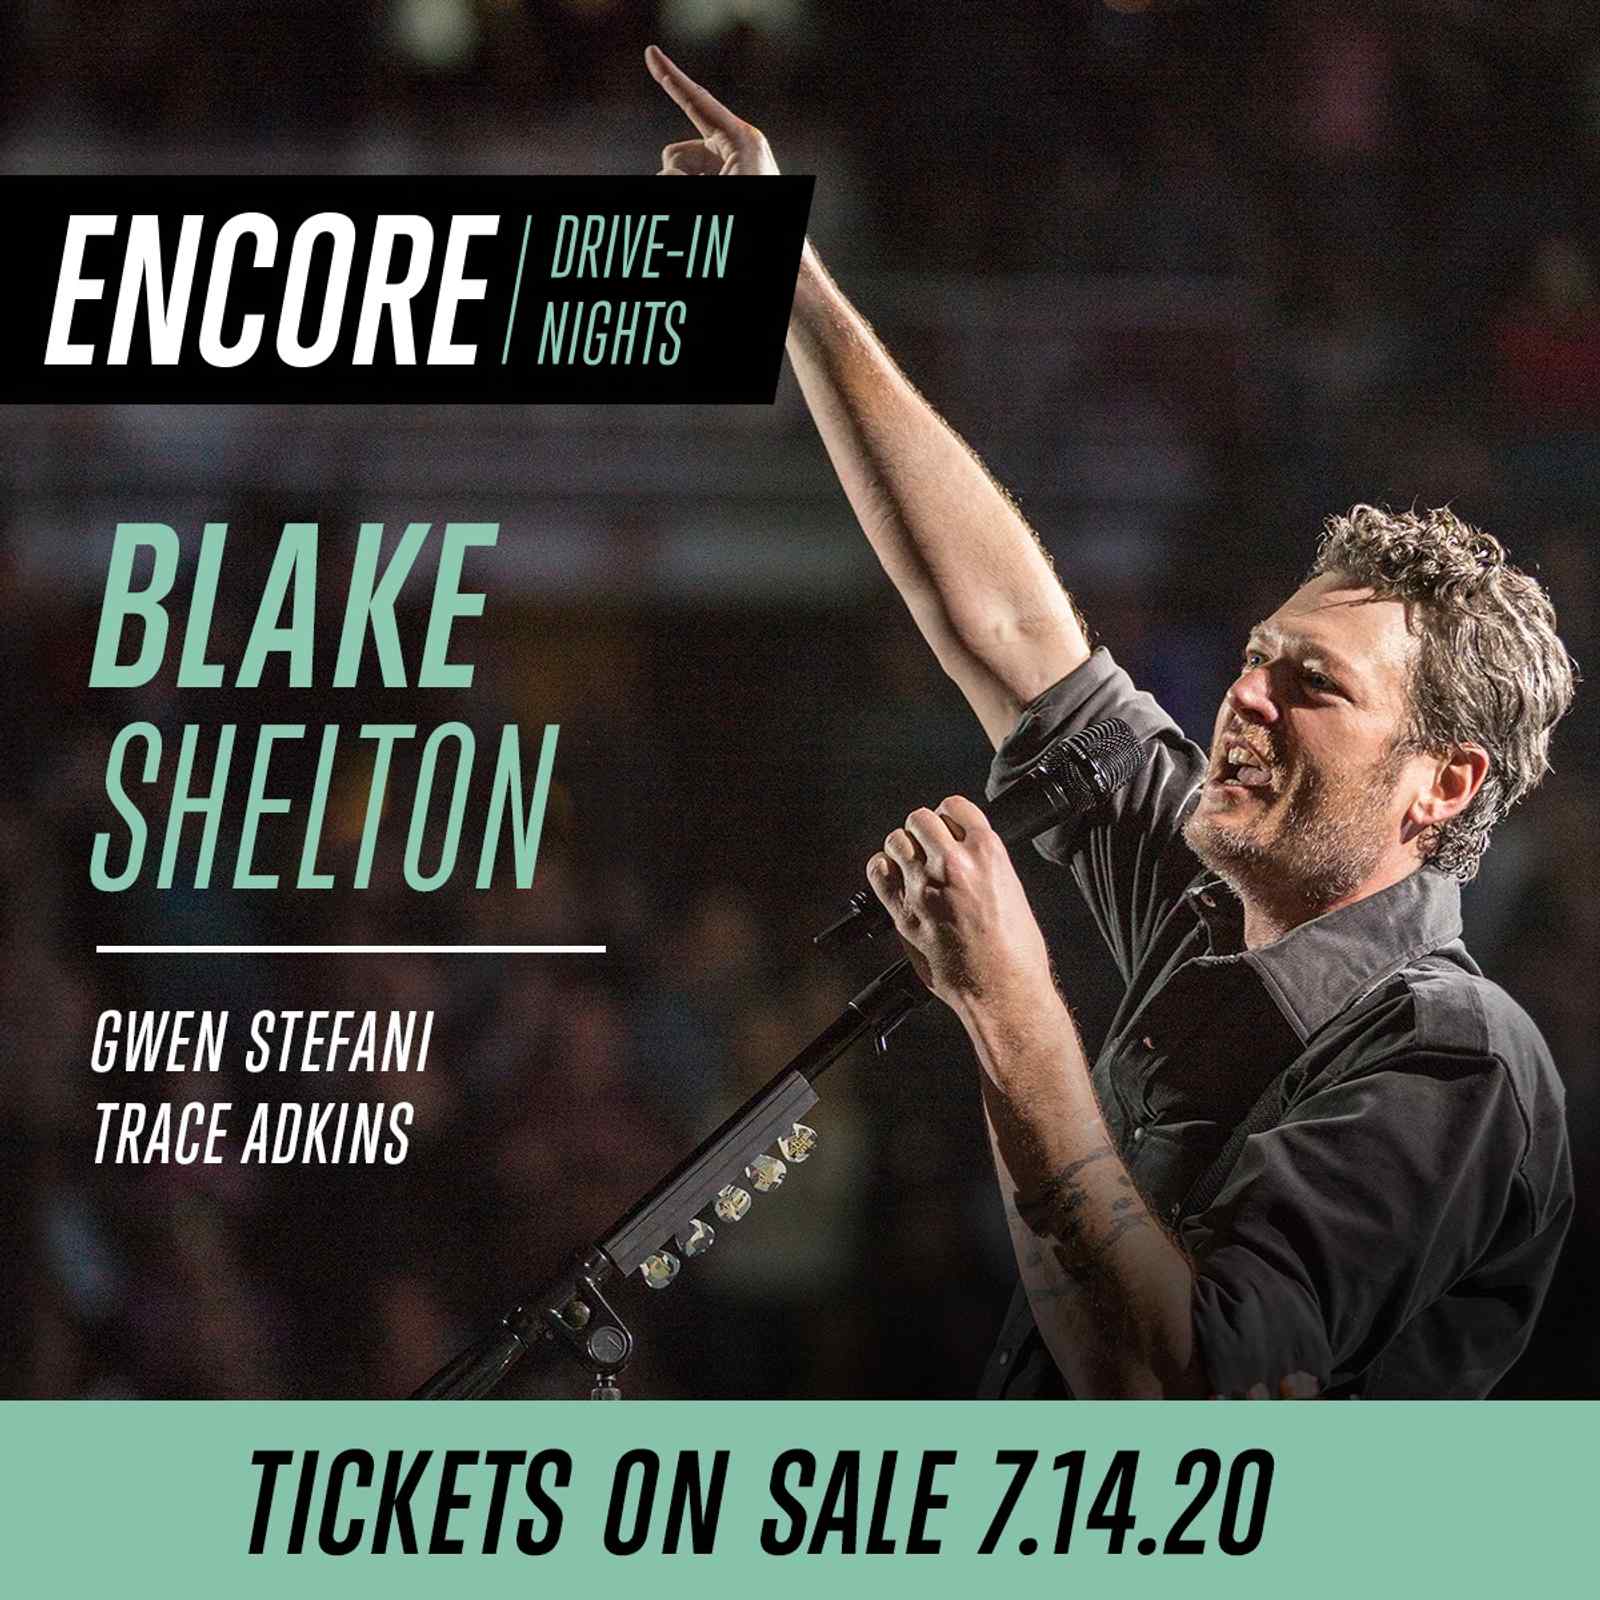 Encore Drive-In Nights with Blake Shelton, Gwen Stefani, and Trace Adkins